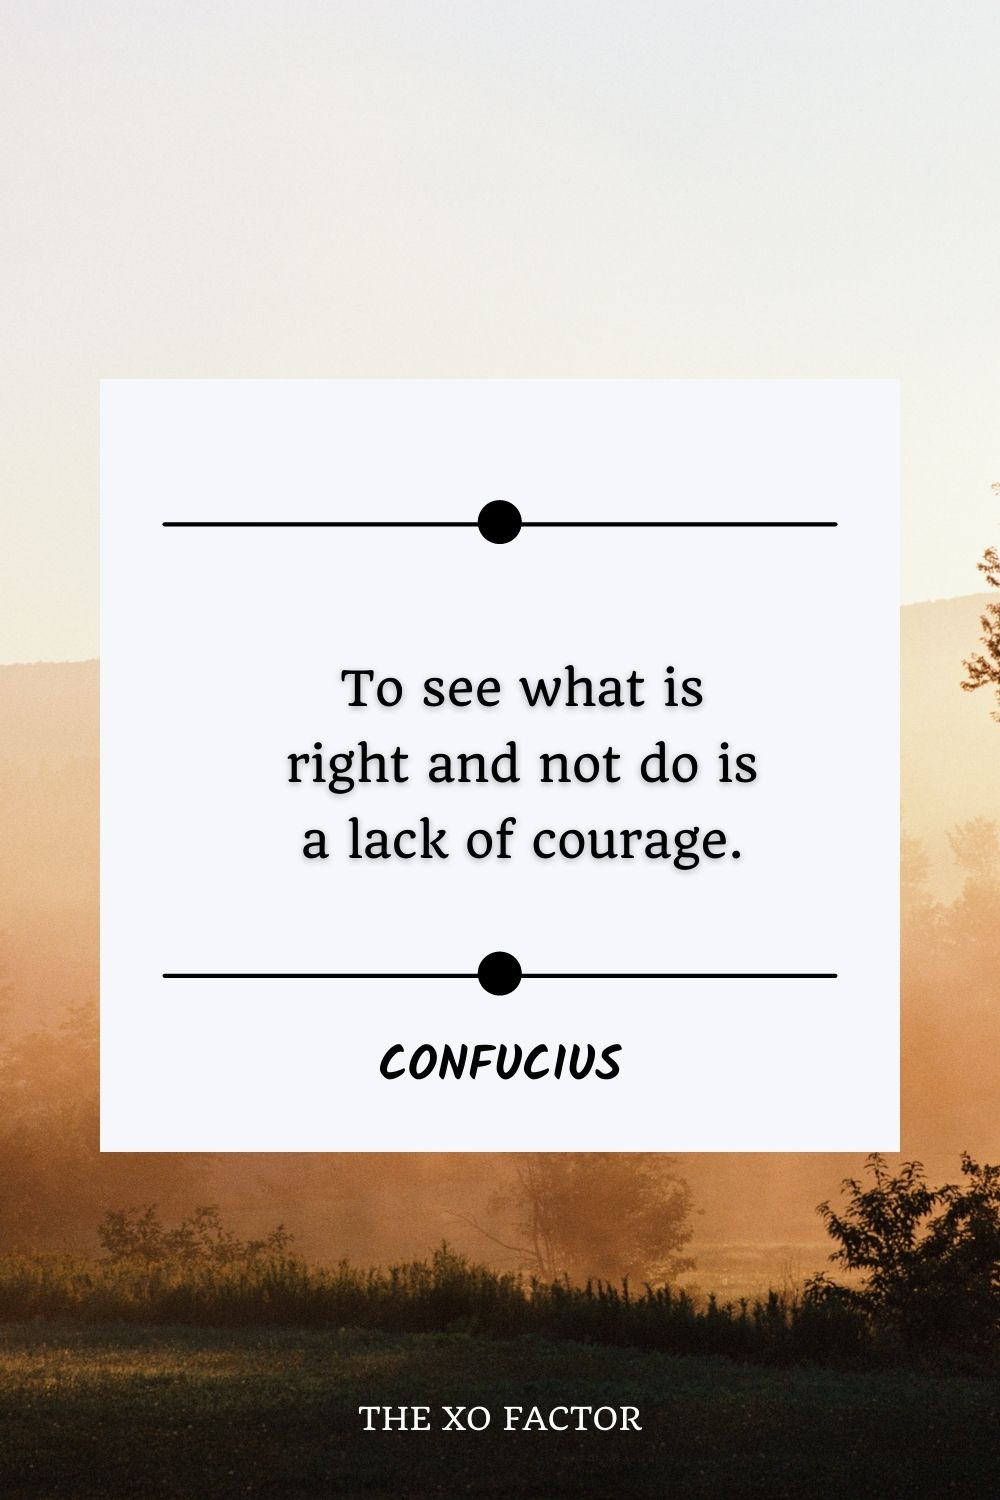 To see what is right and not do is a lack of courage.” – Confucius